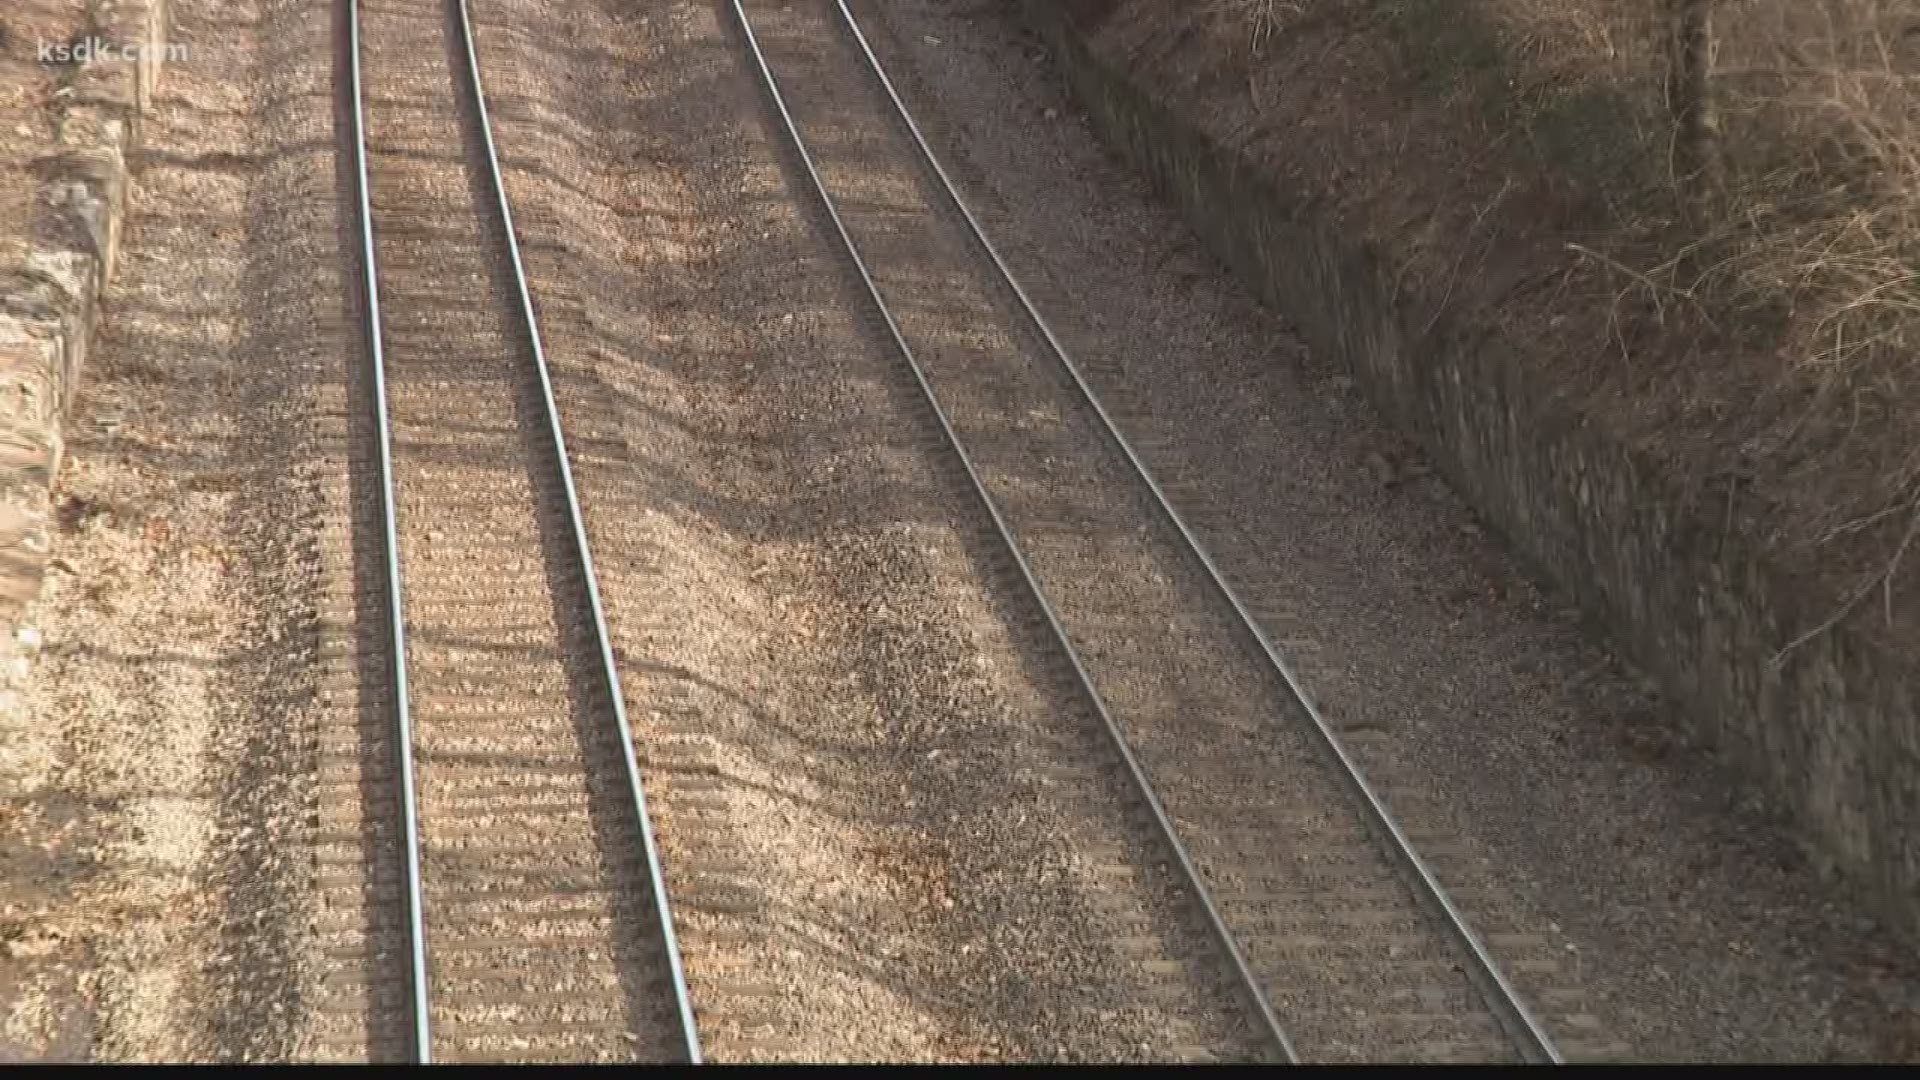 Two people are dead after trying to cross separate train tracks in St. Louis County on the same day.